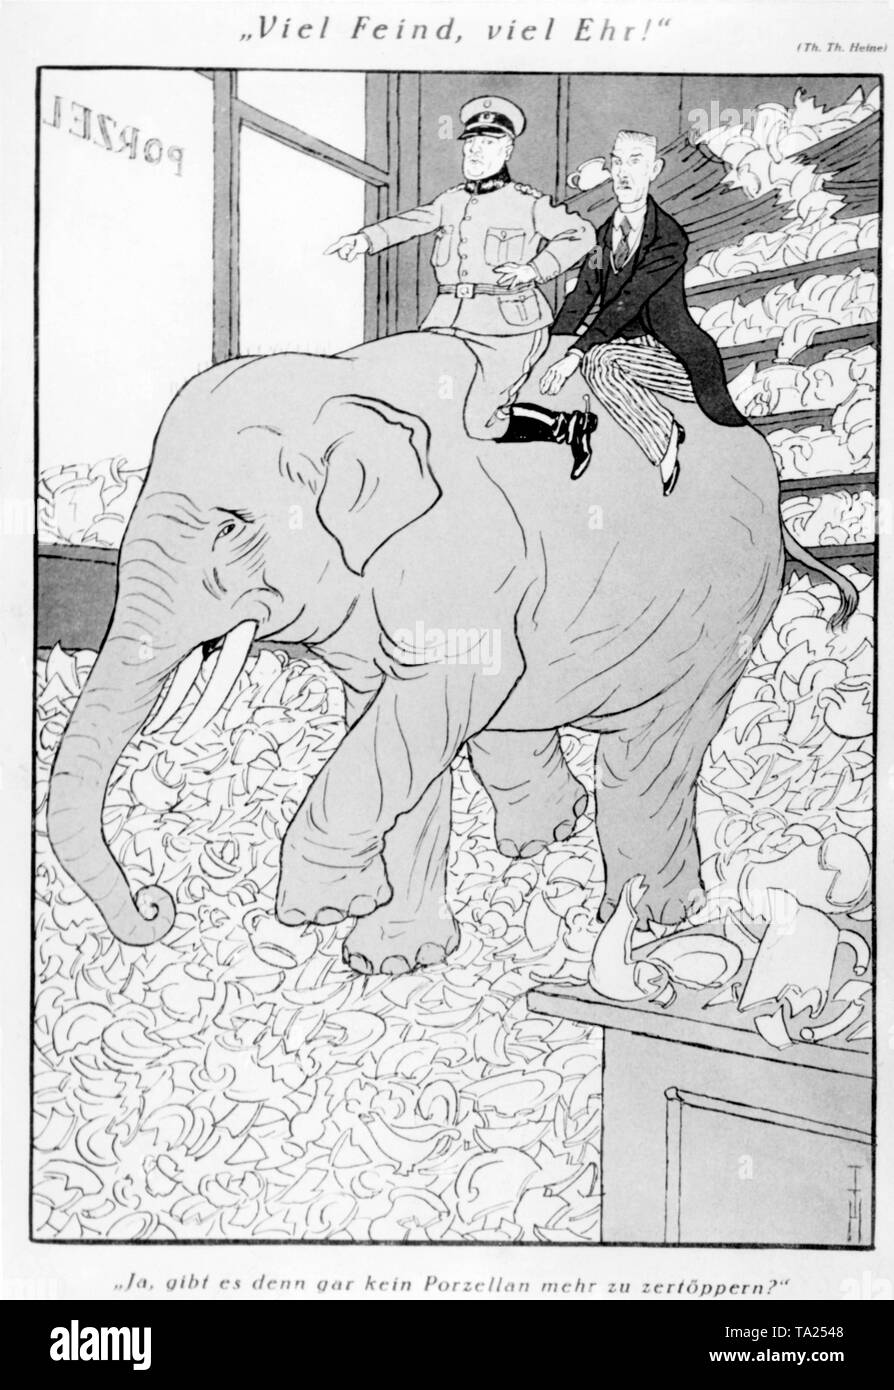 Kurt von Schleicher (in uniform) and Reich Chancellor Franz von Papen march through a porcelain shop with an elephant, saying: 'Yes, there is no more porcelain to crumble'. After unsuccessful negotiations with the National Socialists and the Centre Party, Reich Chancellor von Papen and general von Schleicher had to call off the next cabinet formation. Due to the intrigue of all concerned, the citizens lost more and more confidence in democracy. Stock Photo